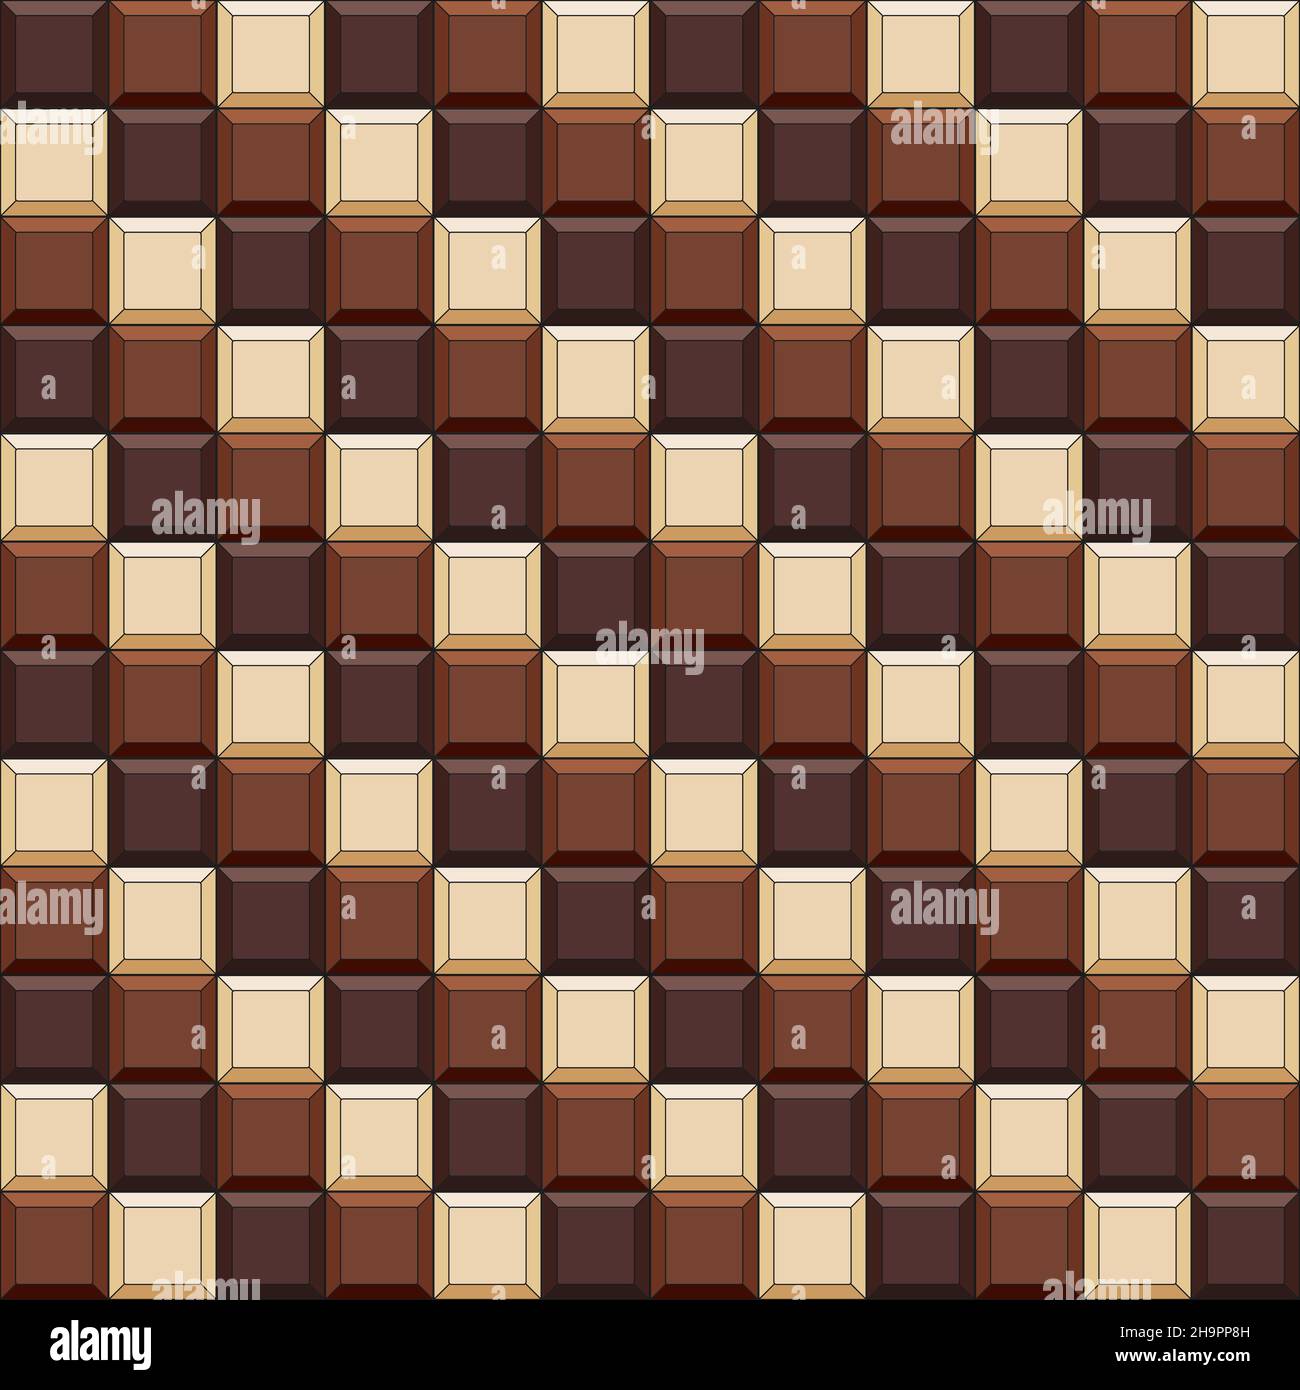 Seamless pattern with chocolate cubes, tiles. Vector color background. Stock Vector